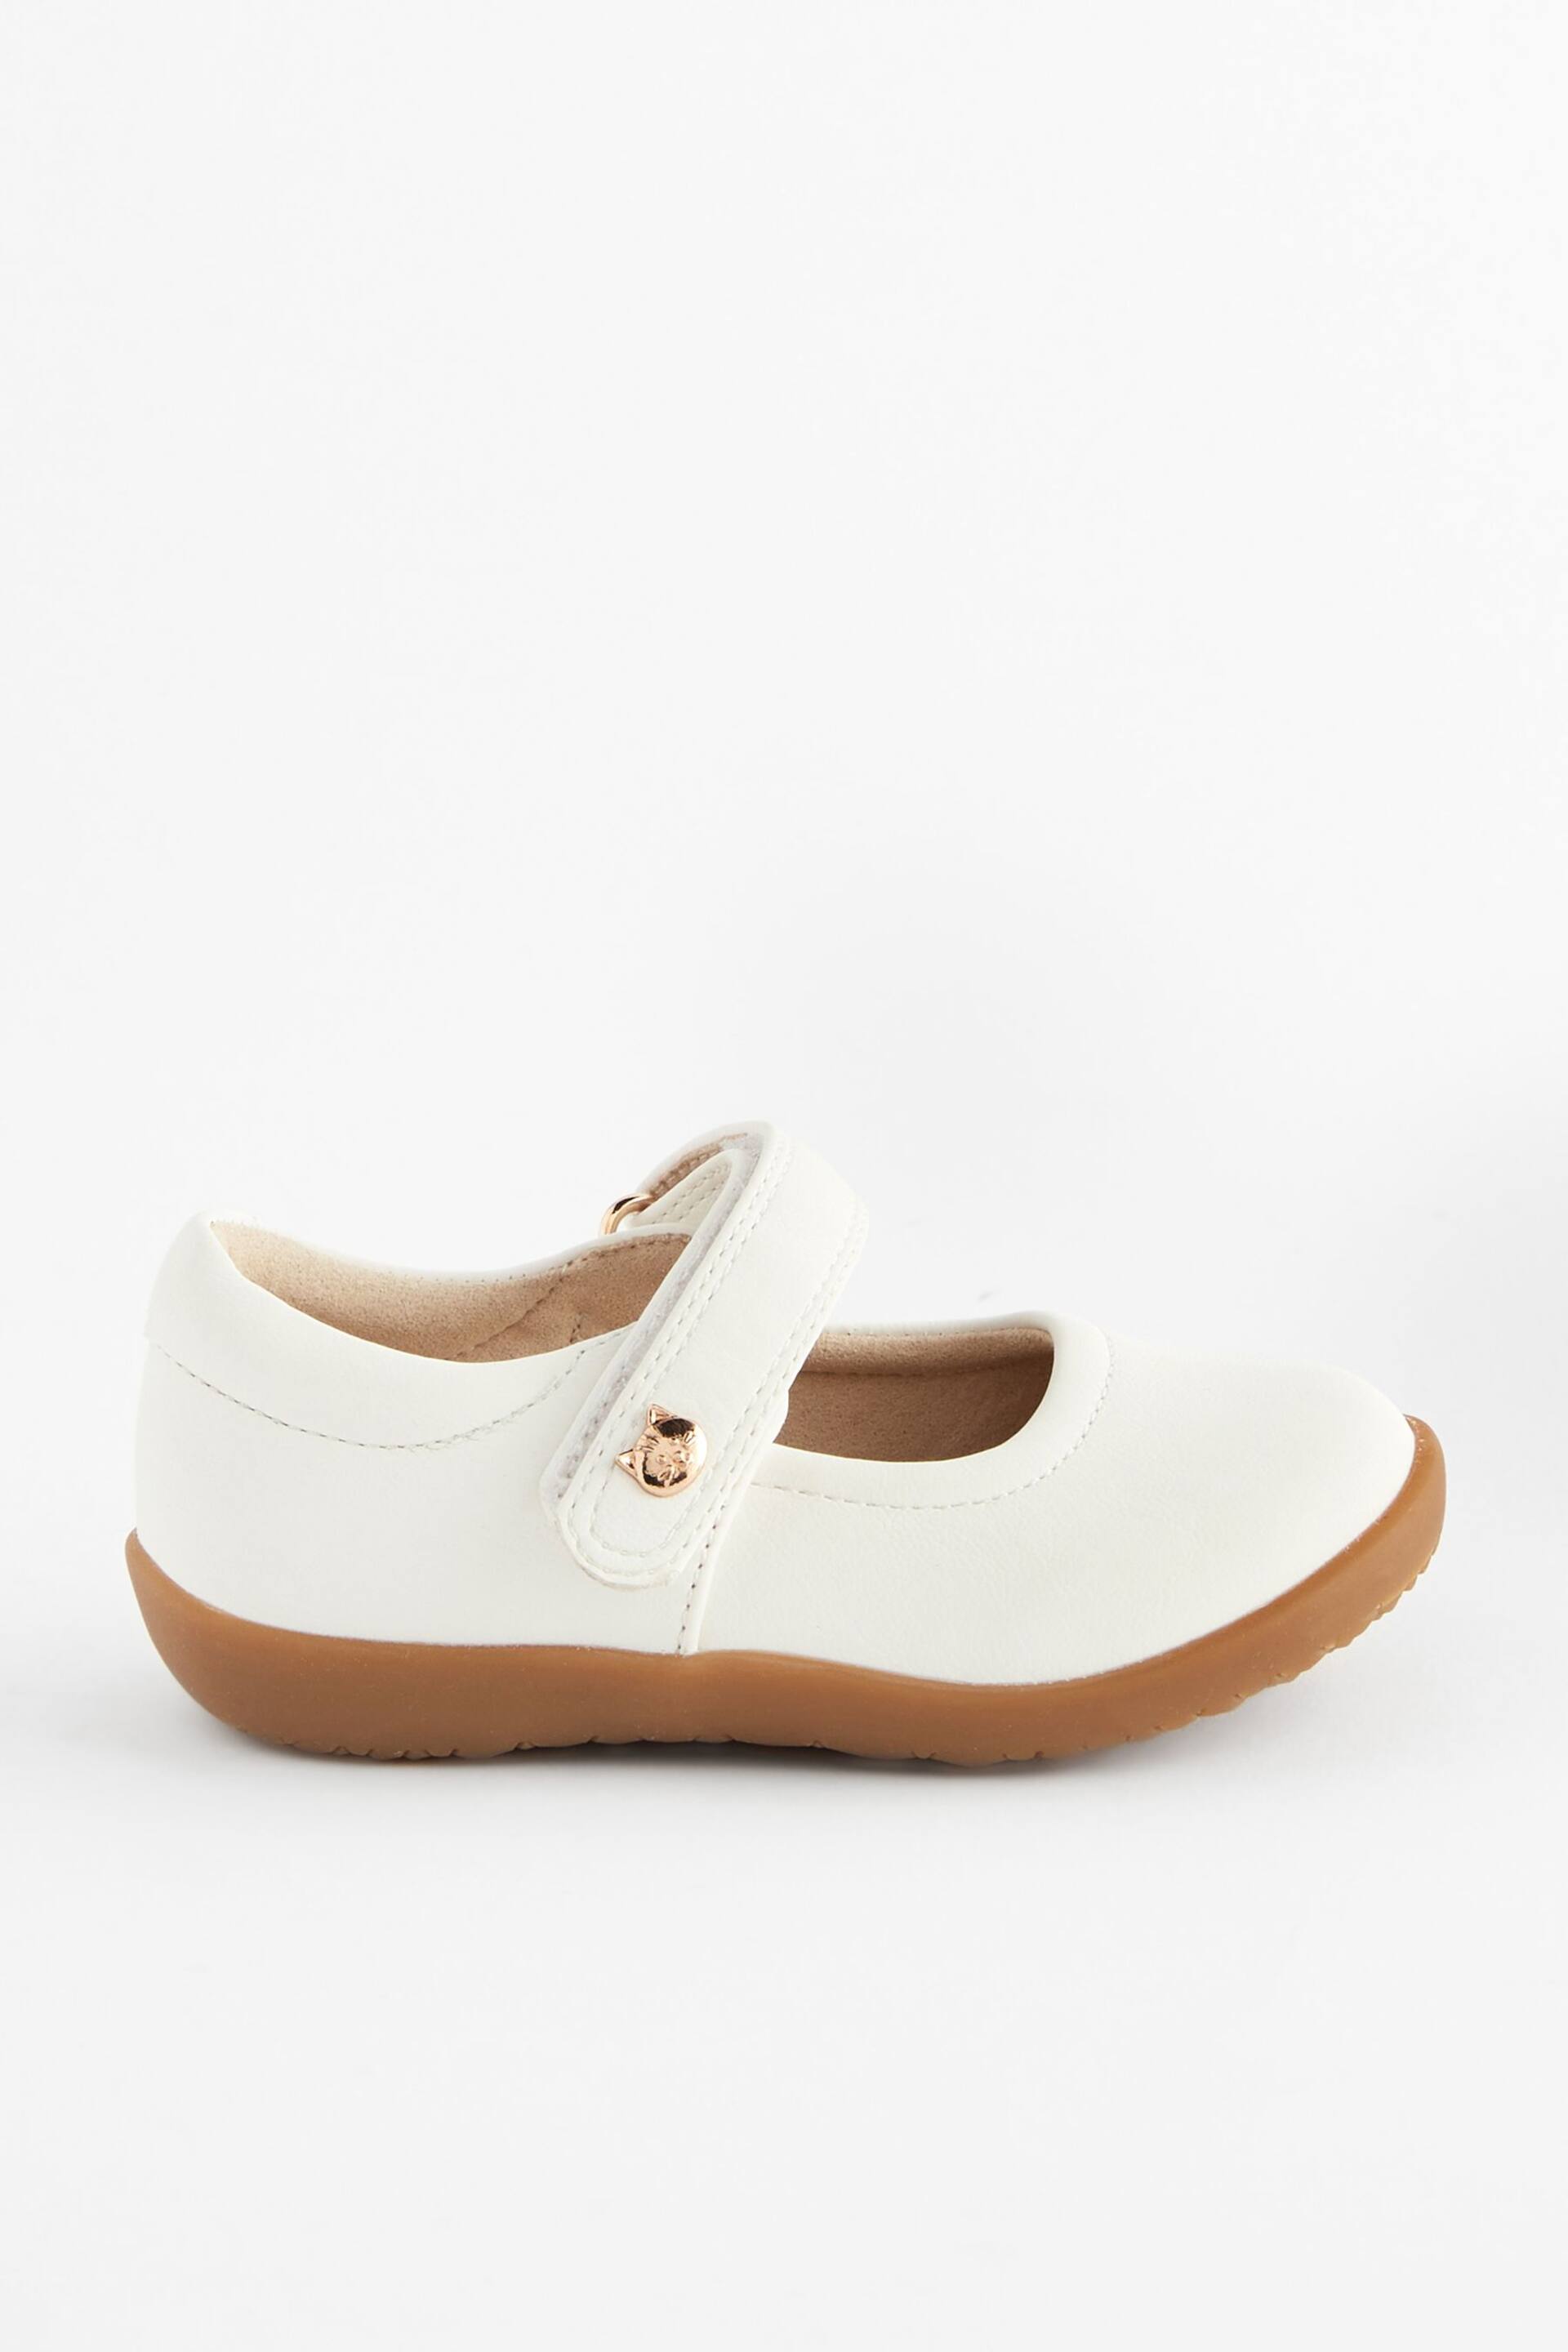 White Wide Fit (G) First Walker Mary Jane Shoes - Image 2 of 5